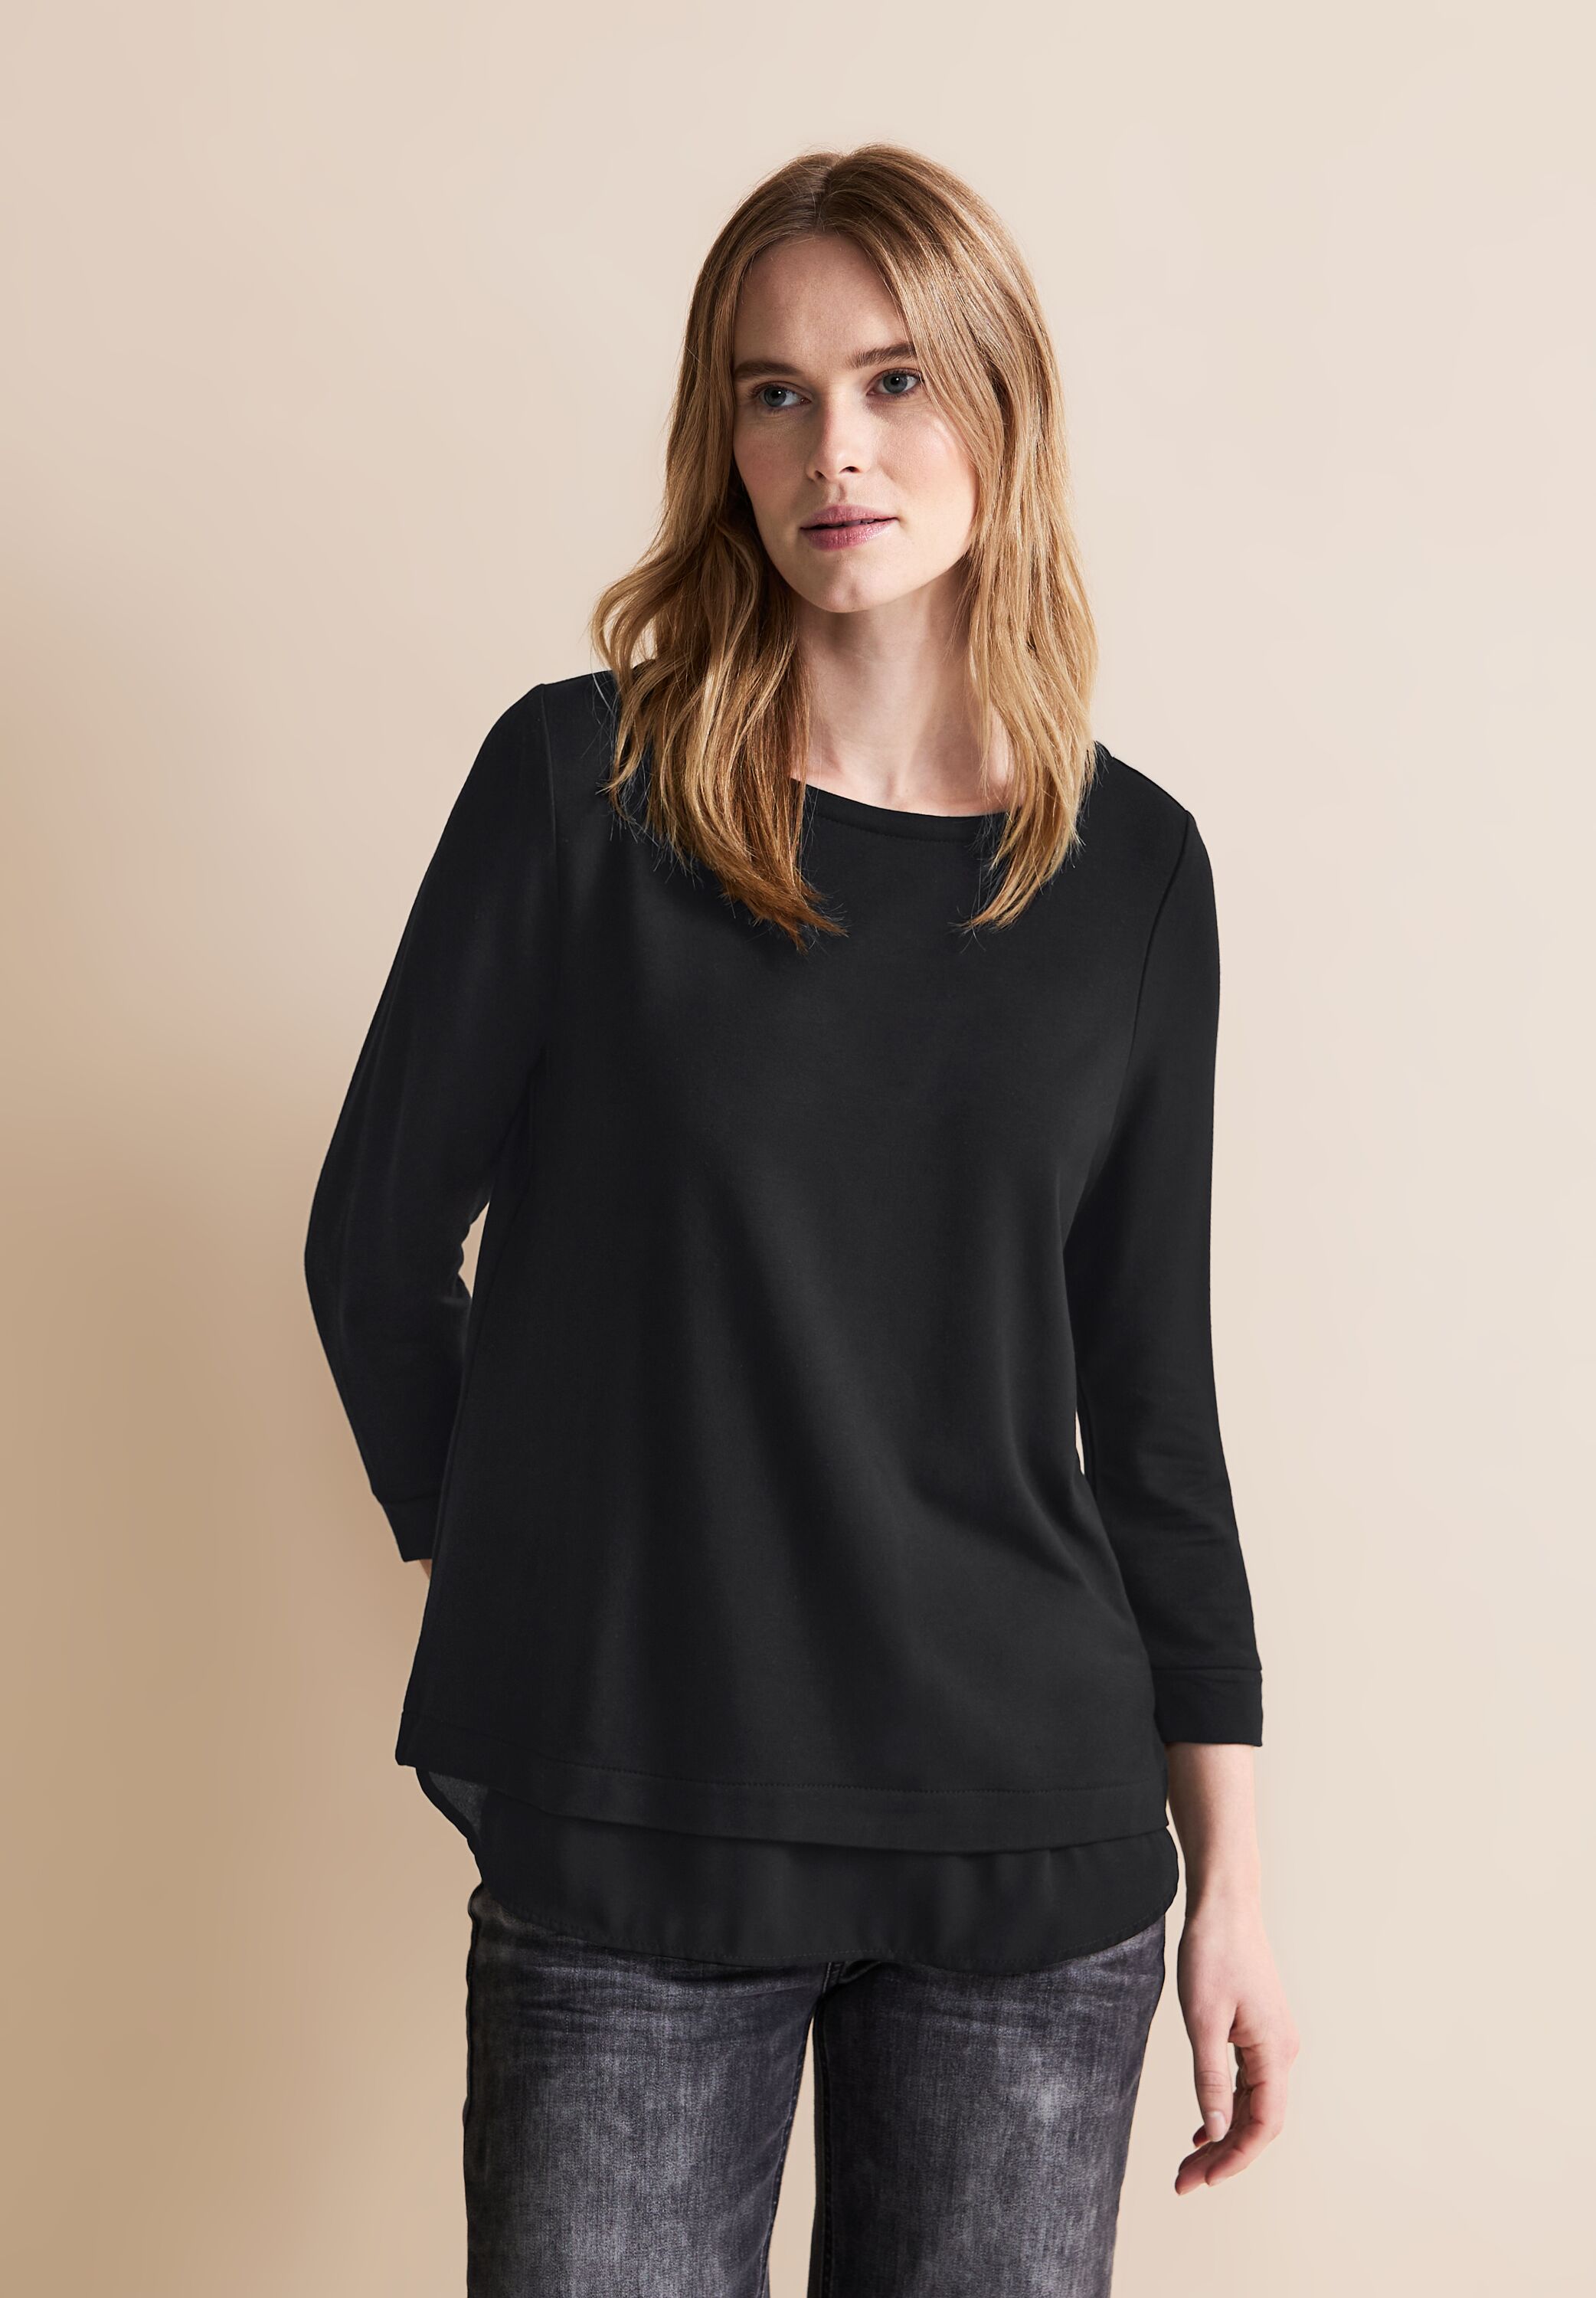 Shirt - A320770-10001 Street One Black in CONCEPT Mode